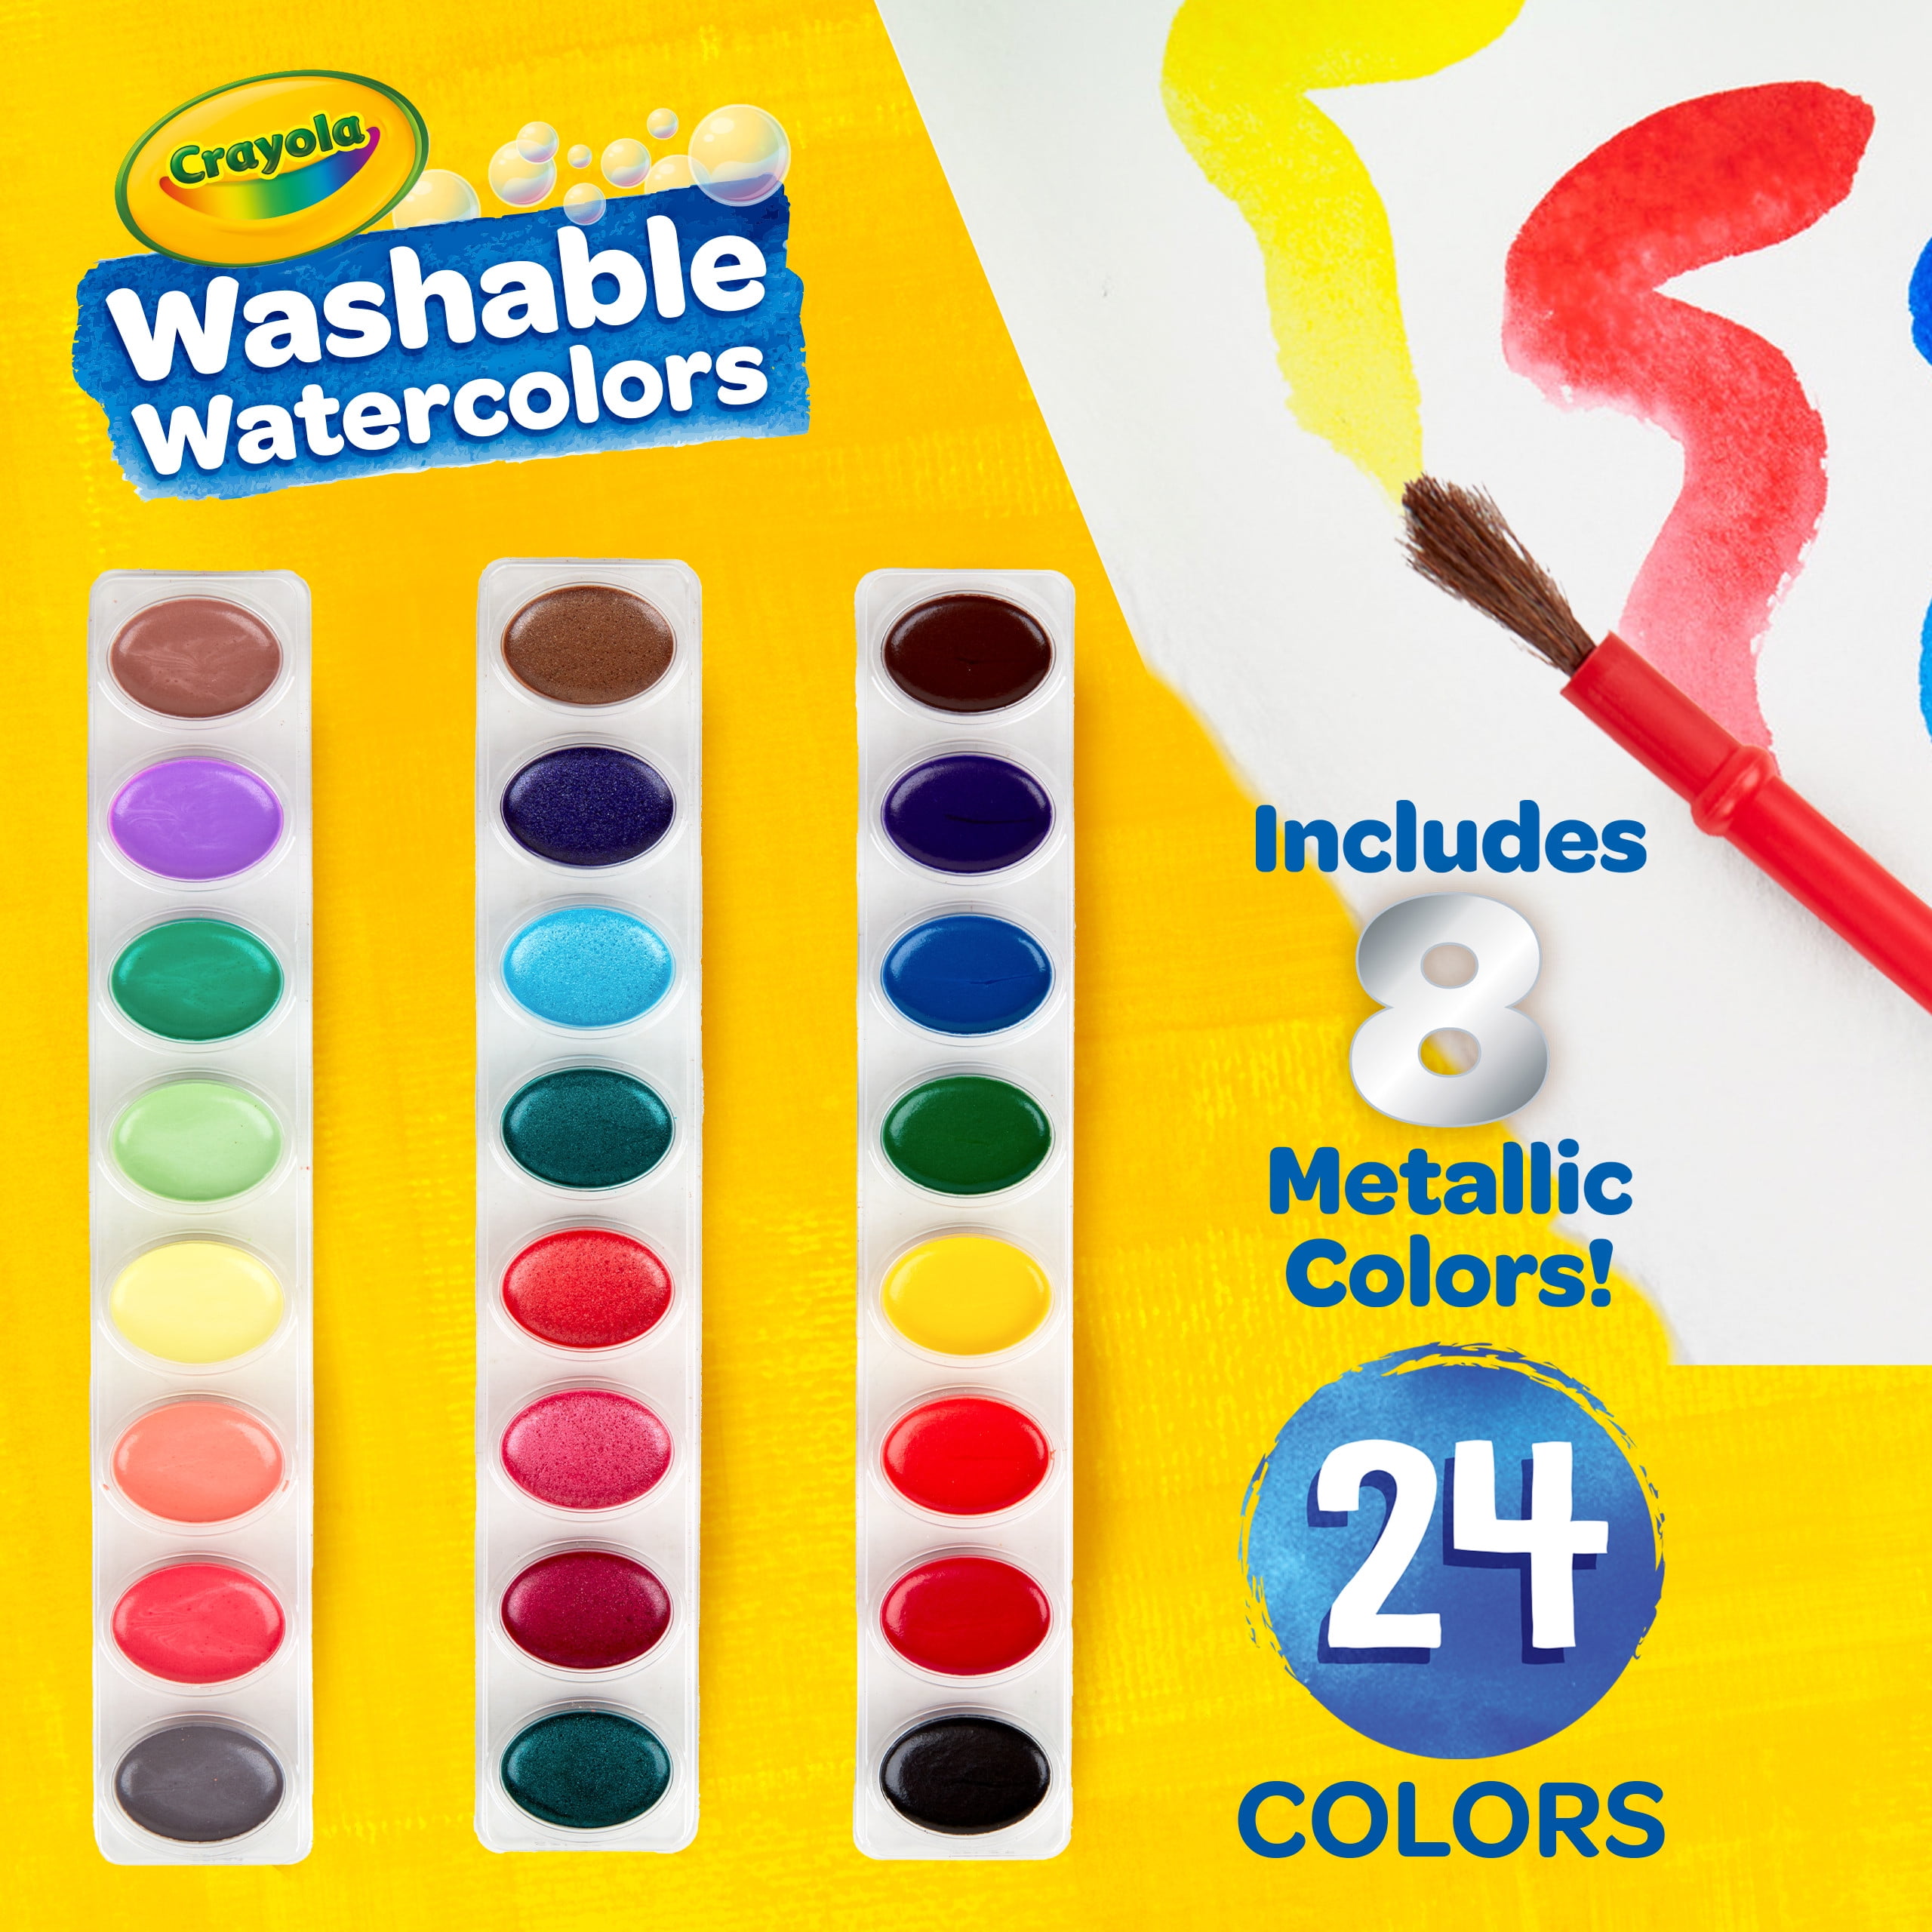 HIMI 36 Pcs Washable Crayons Watercolor Set for Kids/Toddler